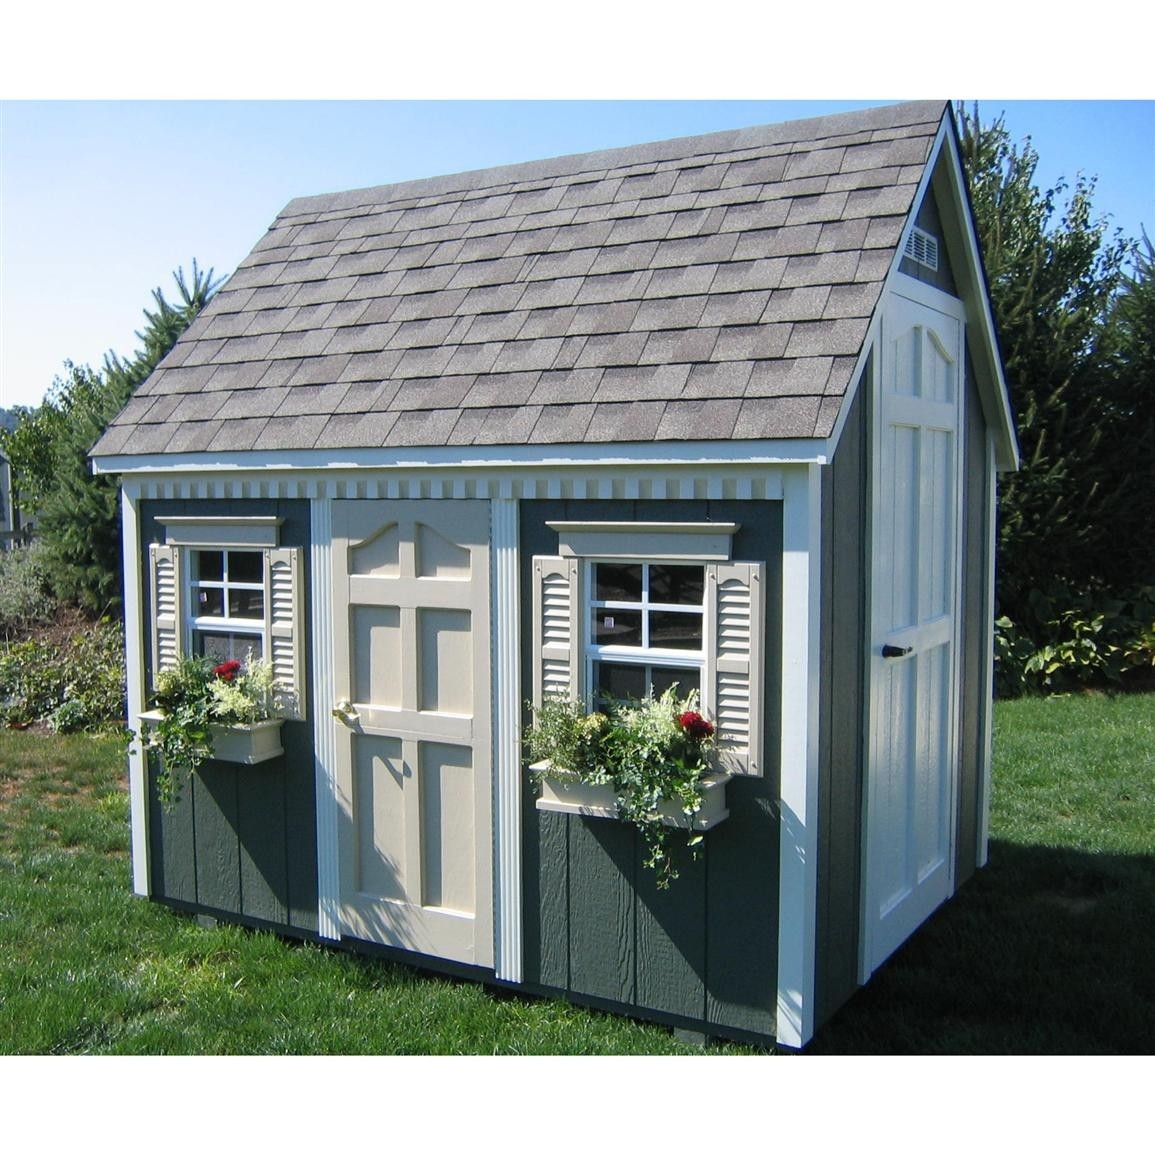 Suncast r 8 x 6 backyard cottage playhouse with front